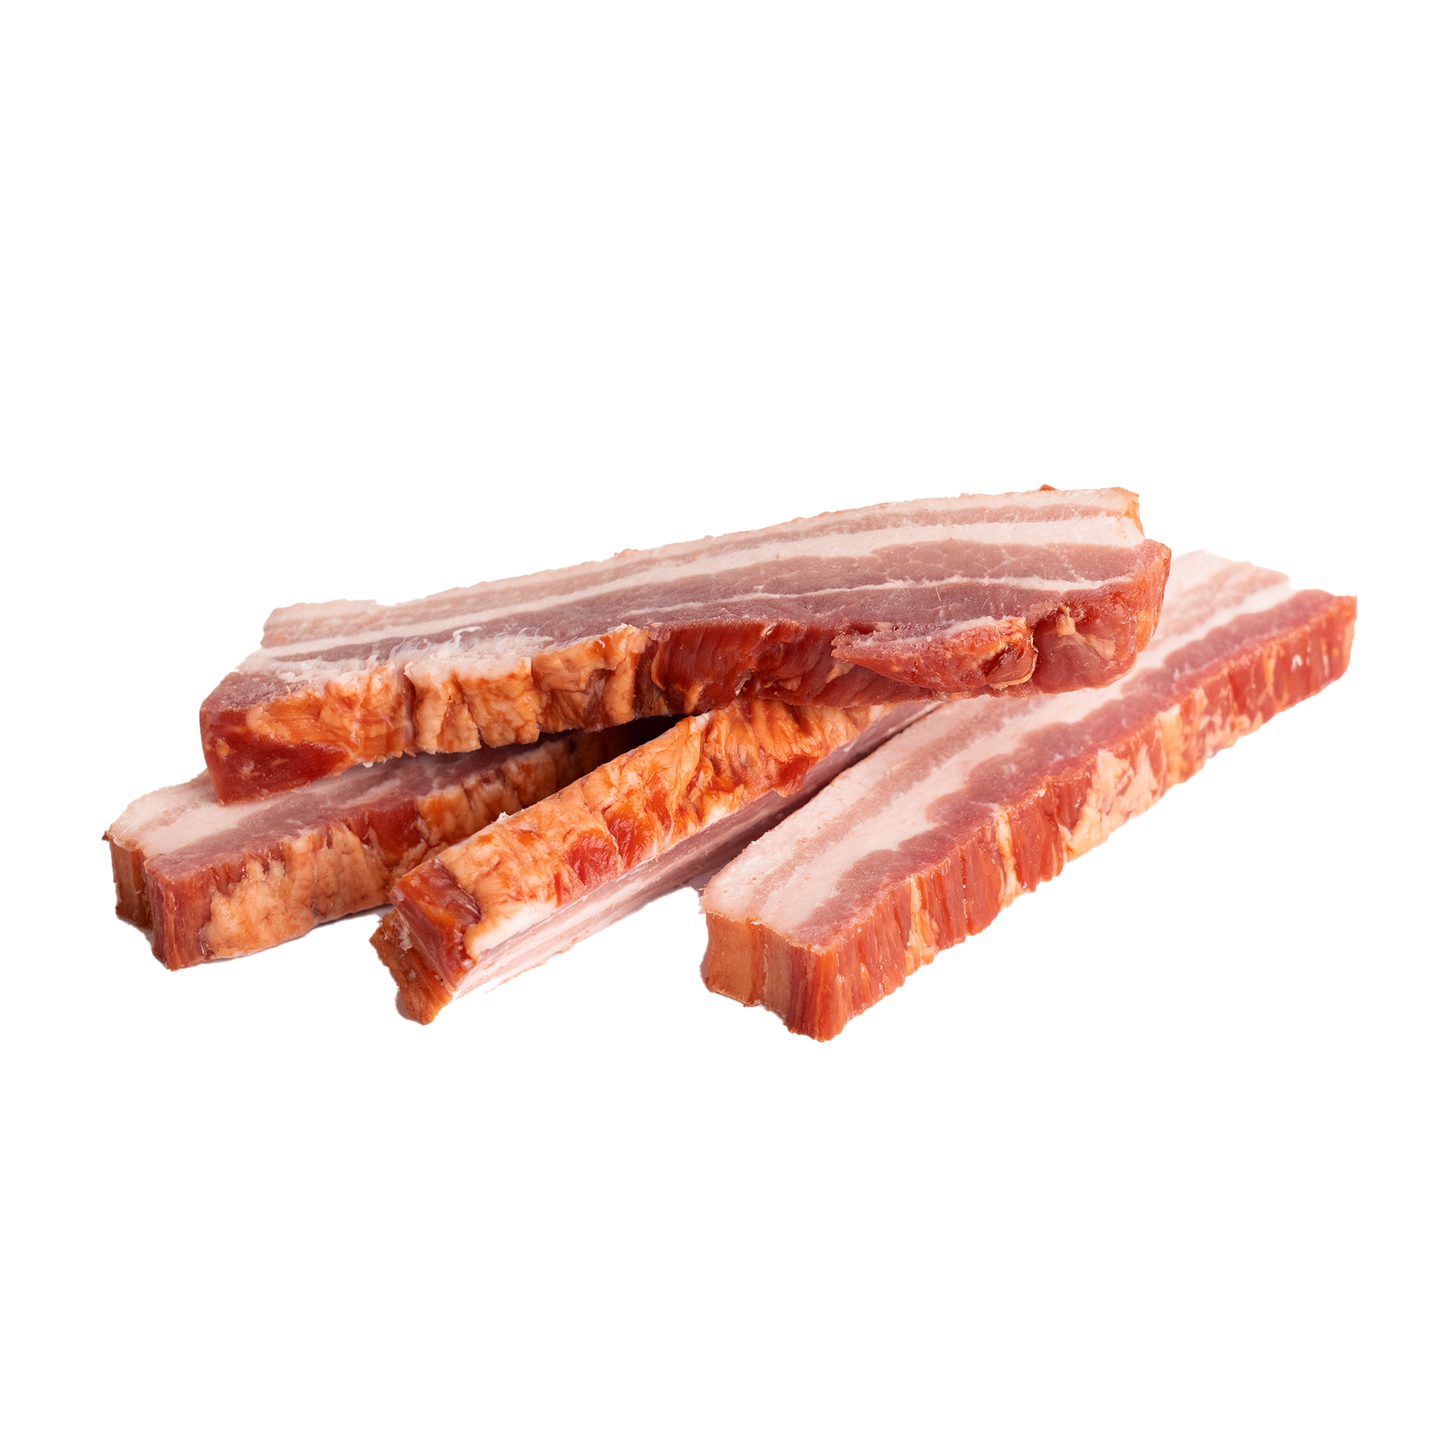 Thick Applewood Bacon(1 lb)